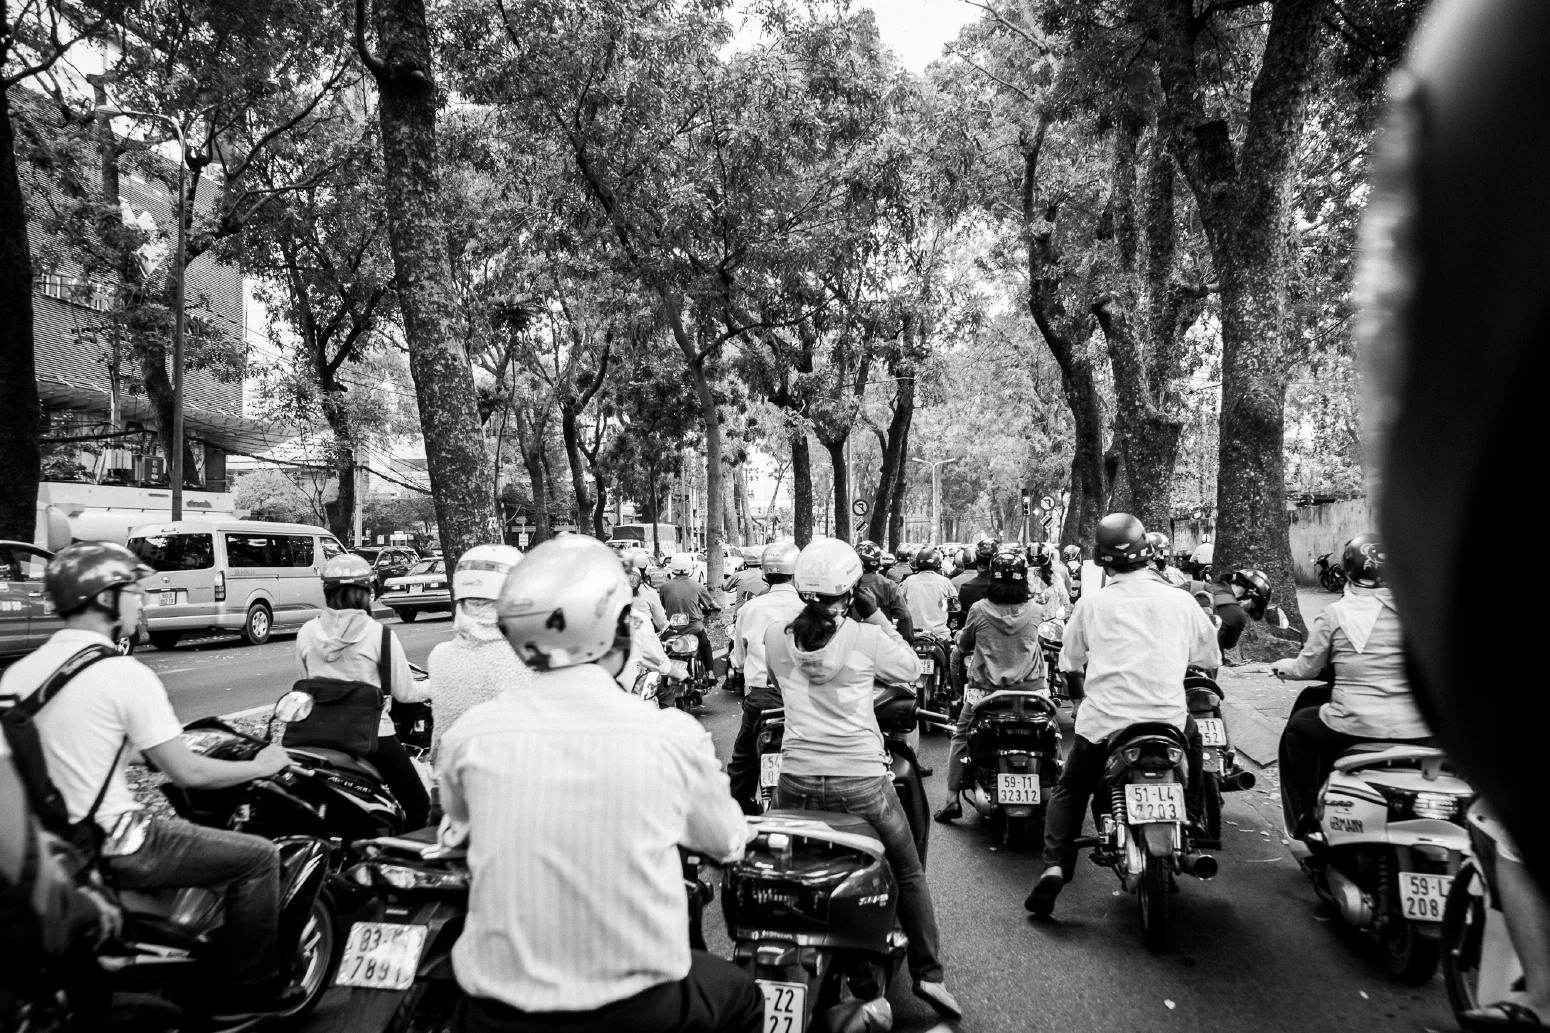 ESCAPING THE TRAFFIC. Ho Chi Minh City, Vietnam